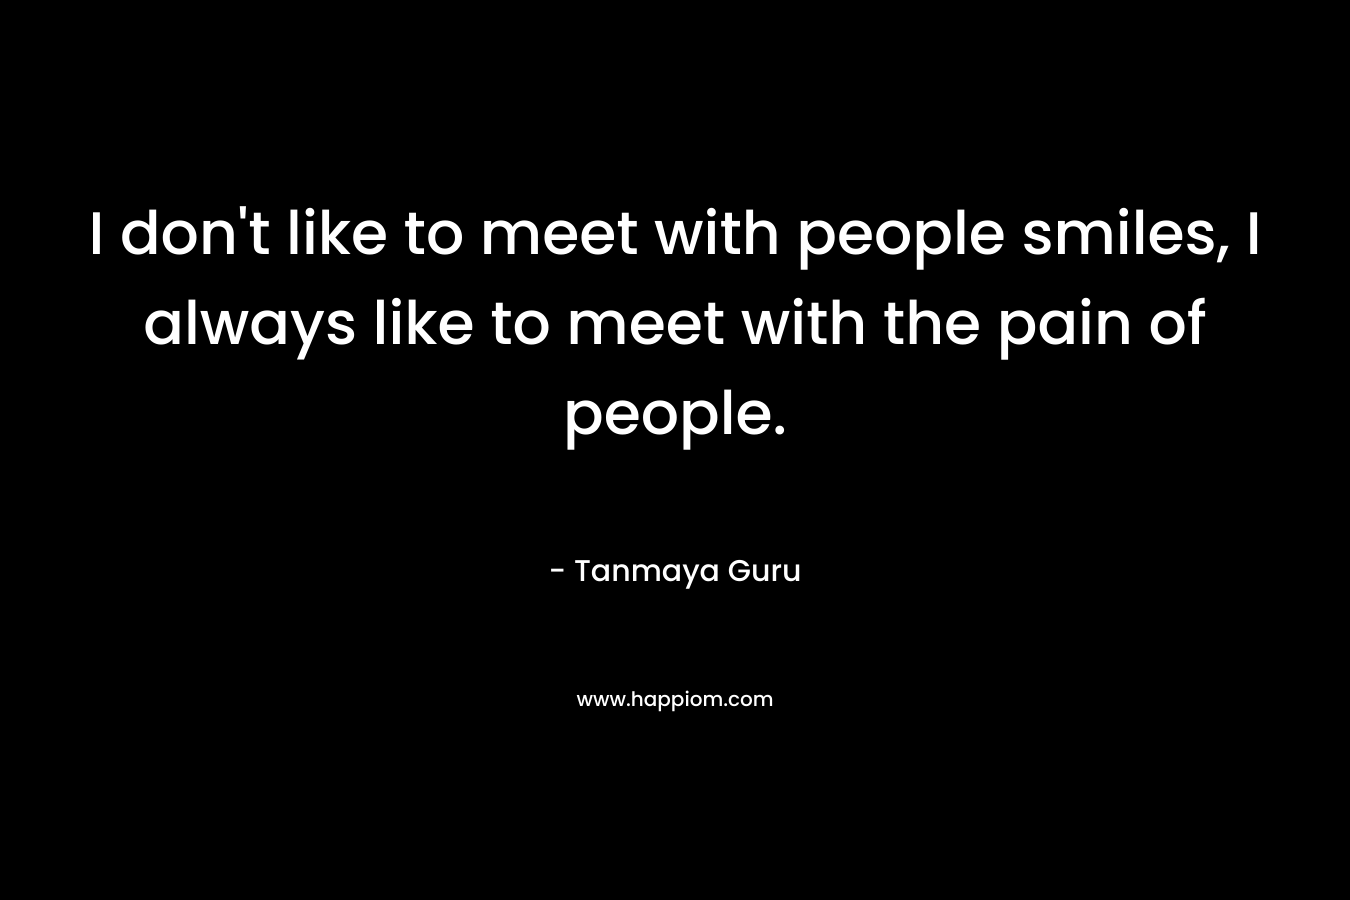 I don't like to meet with people smiles, I always like to meet with the pain of people.